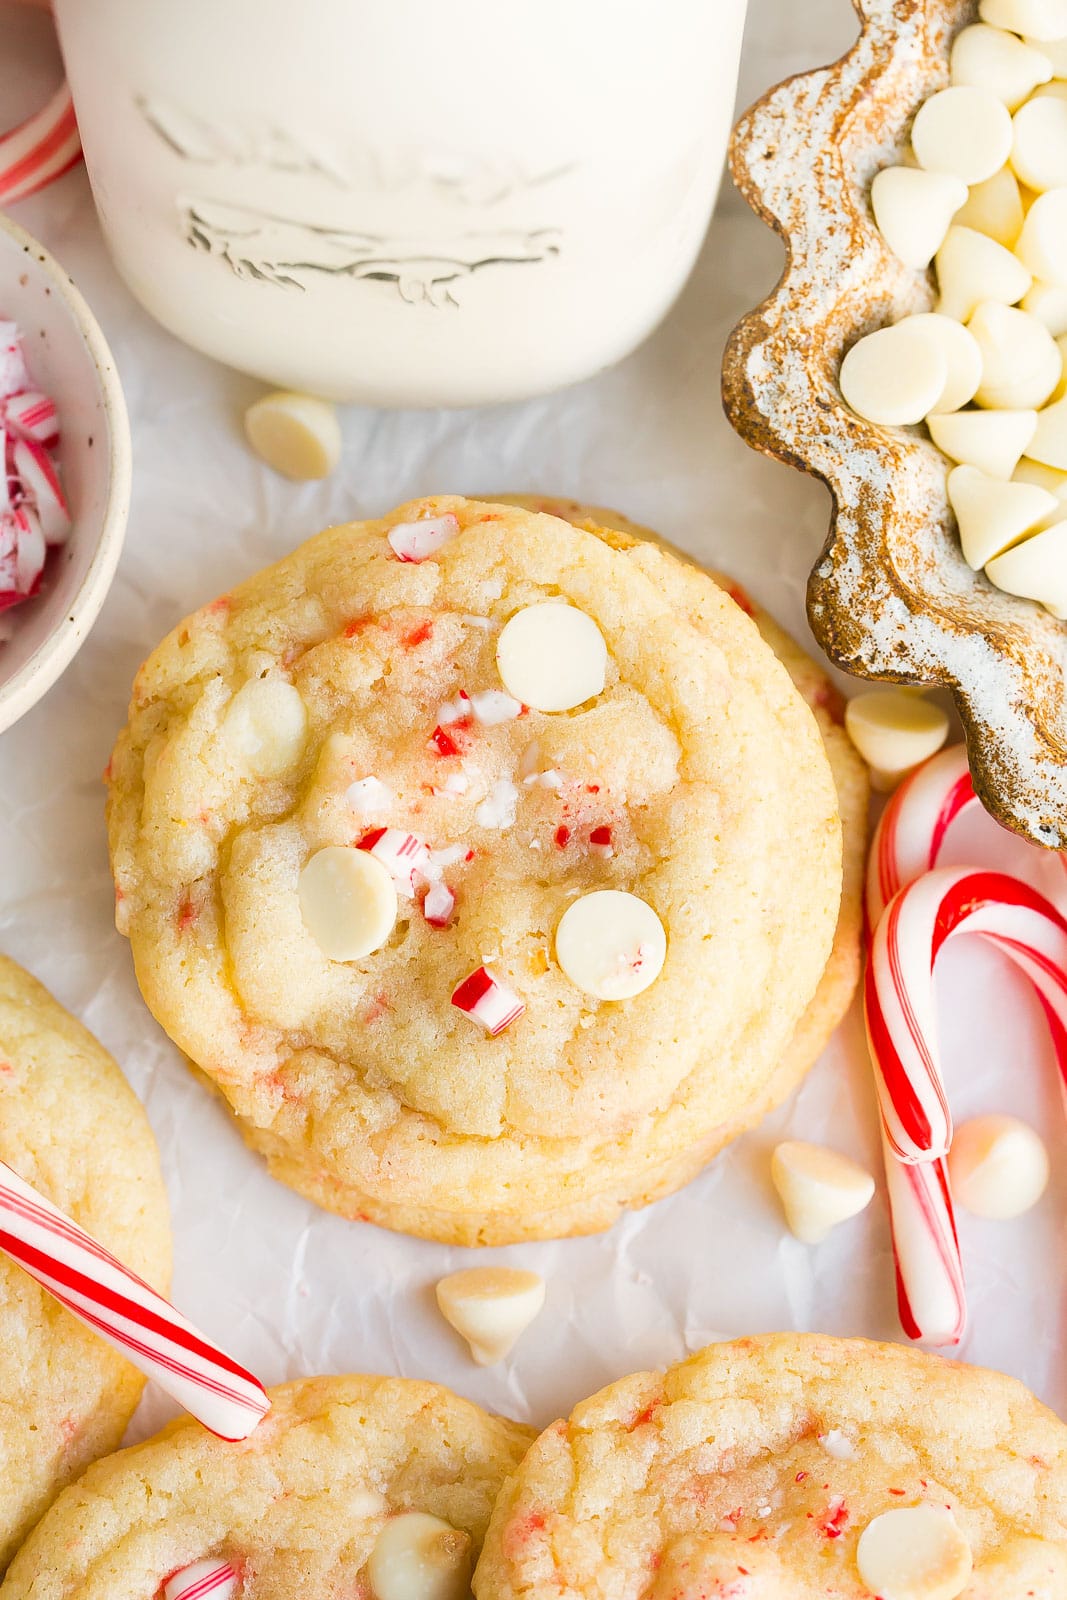 Birds eye view of white chocolate cookie with crushed candy canes.